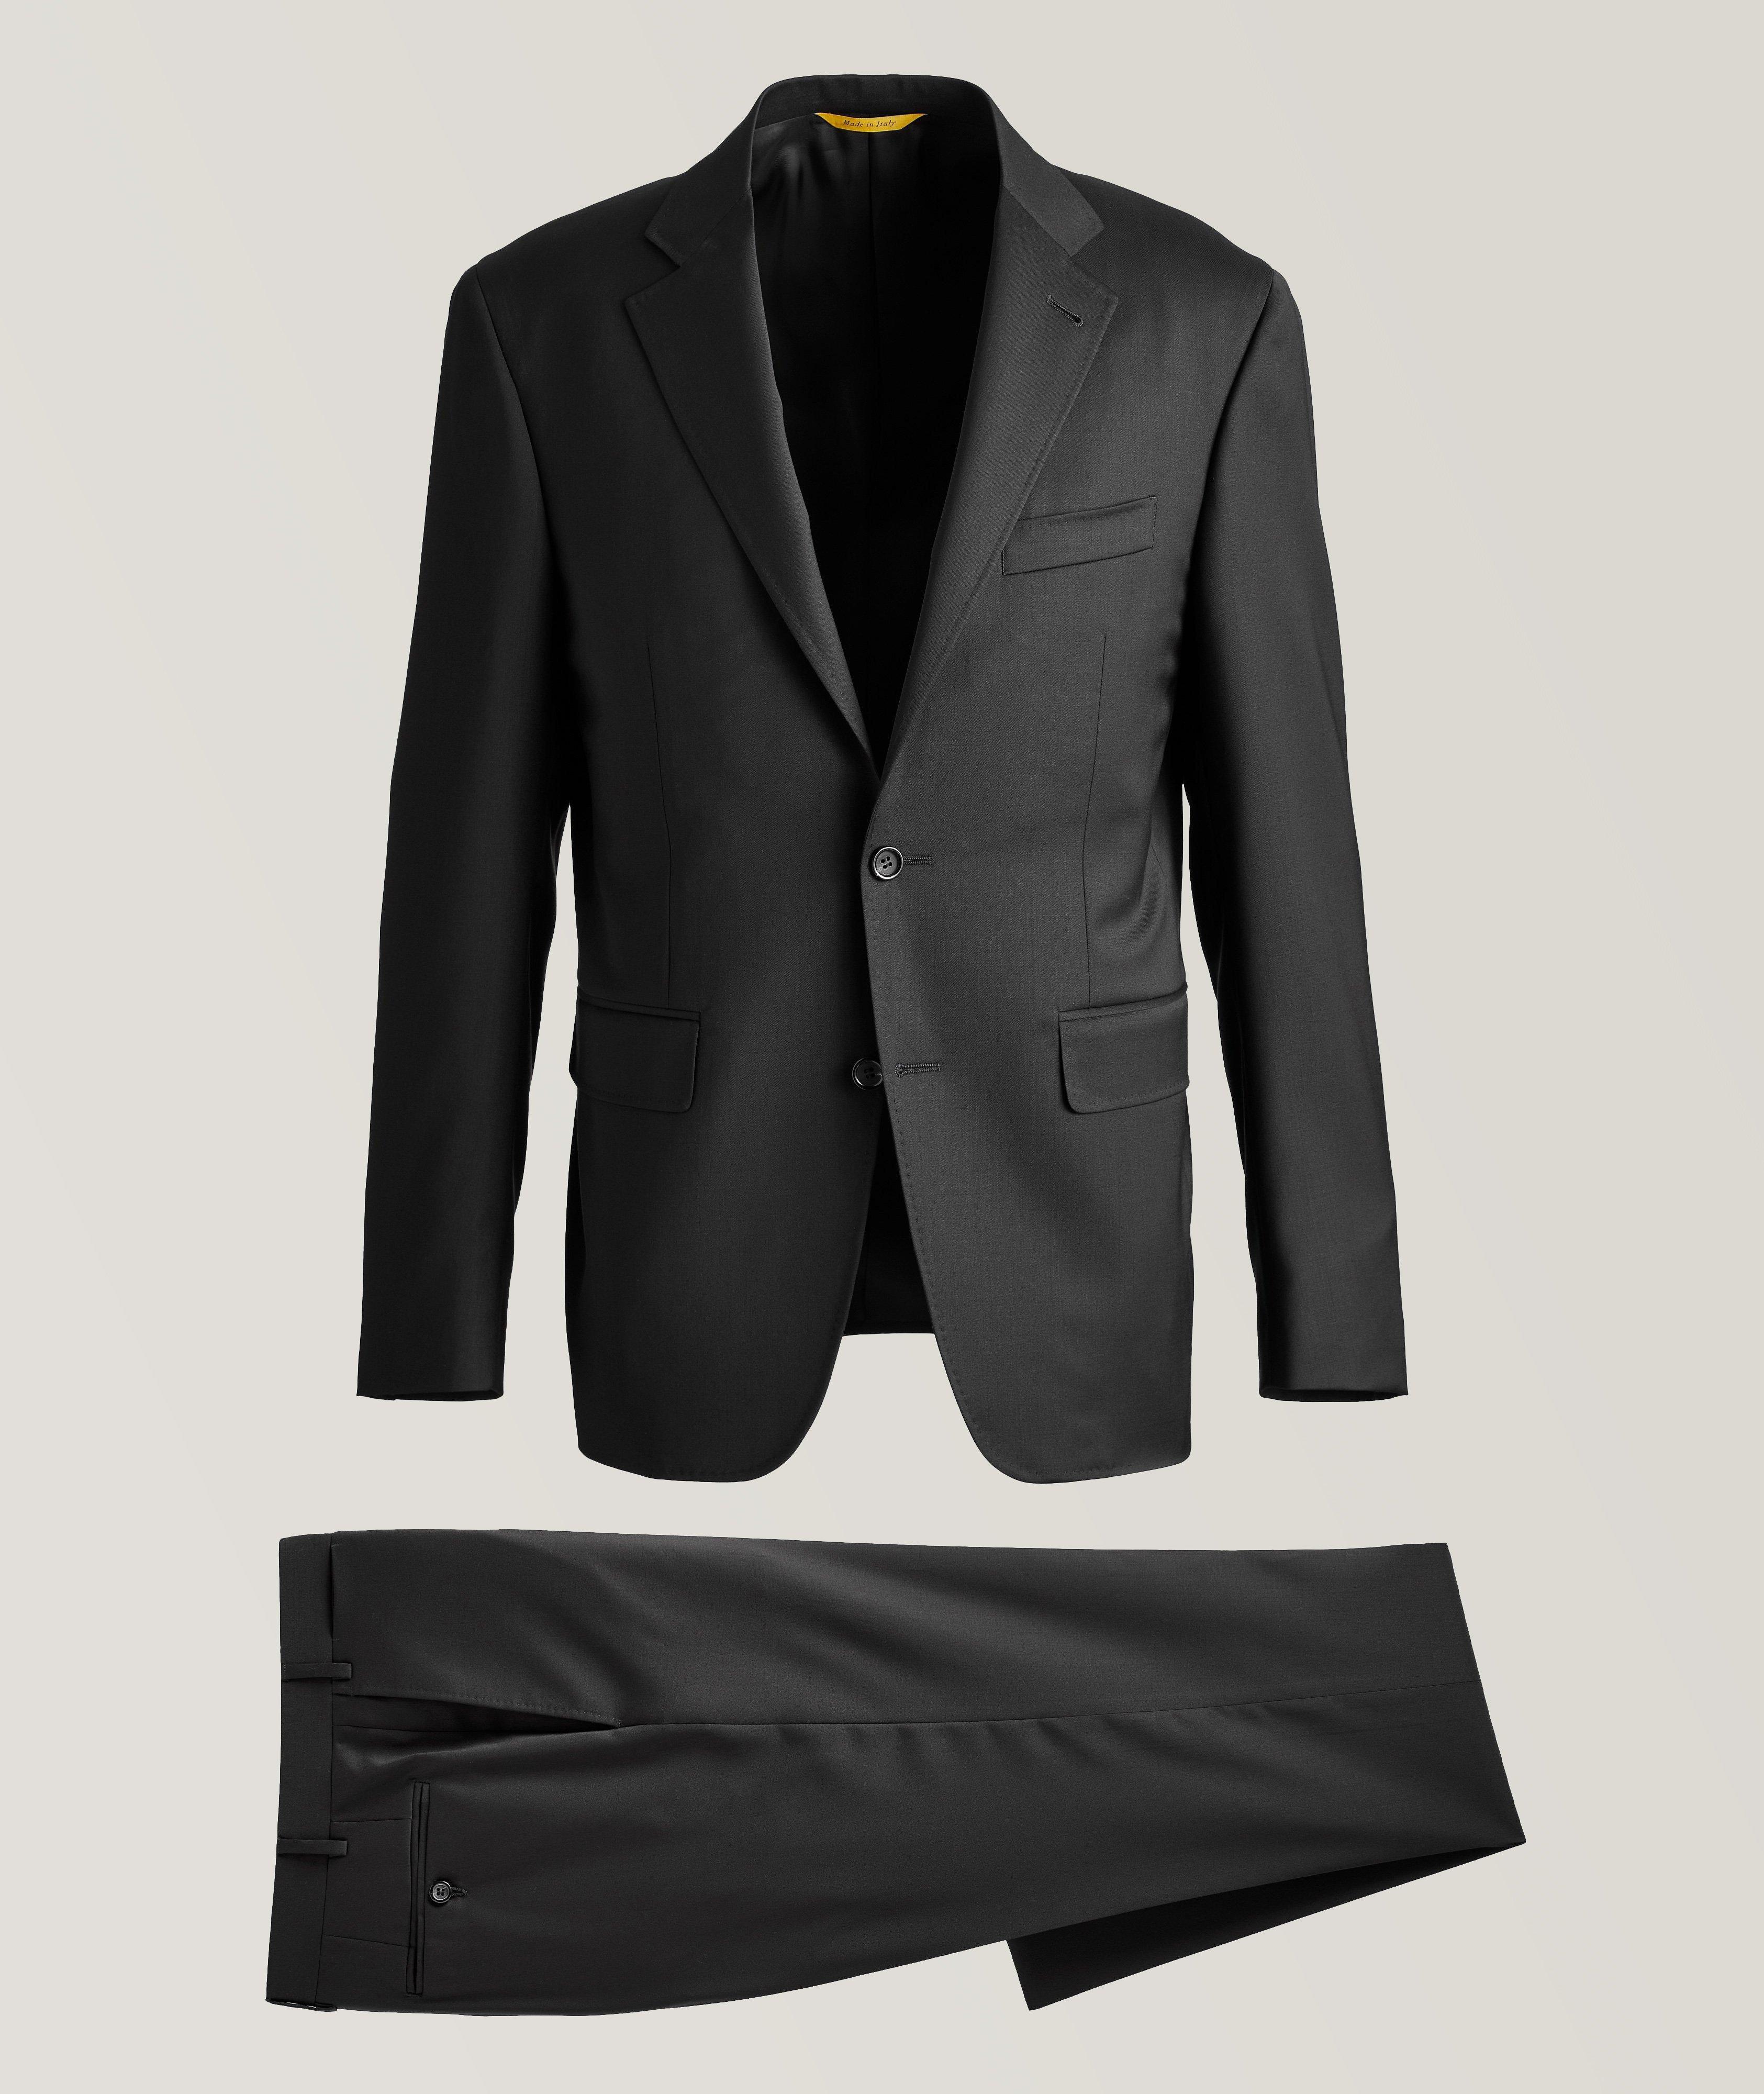 Canali Kei Performance Wool Suit